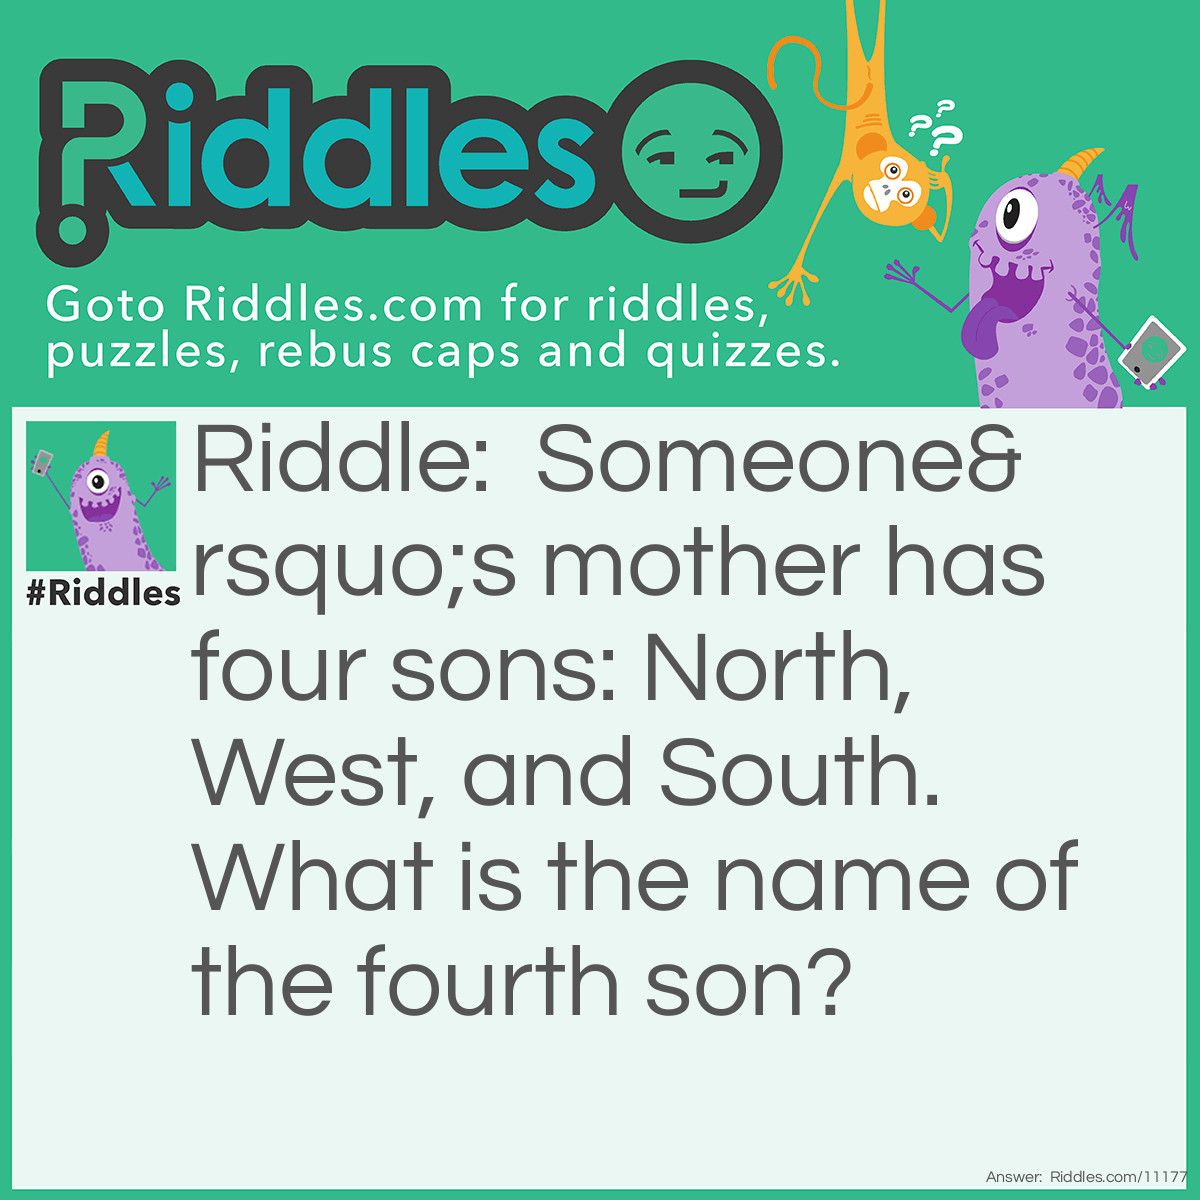 Riddle: Someone’s mother has four sons: North, West, and South. What is the name of the fourth son? Answer: Someone.